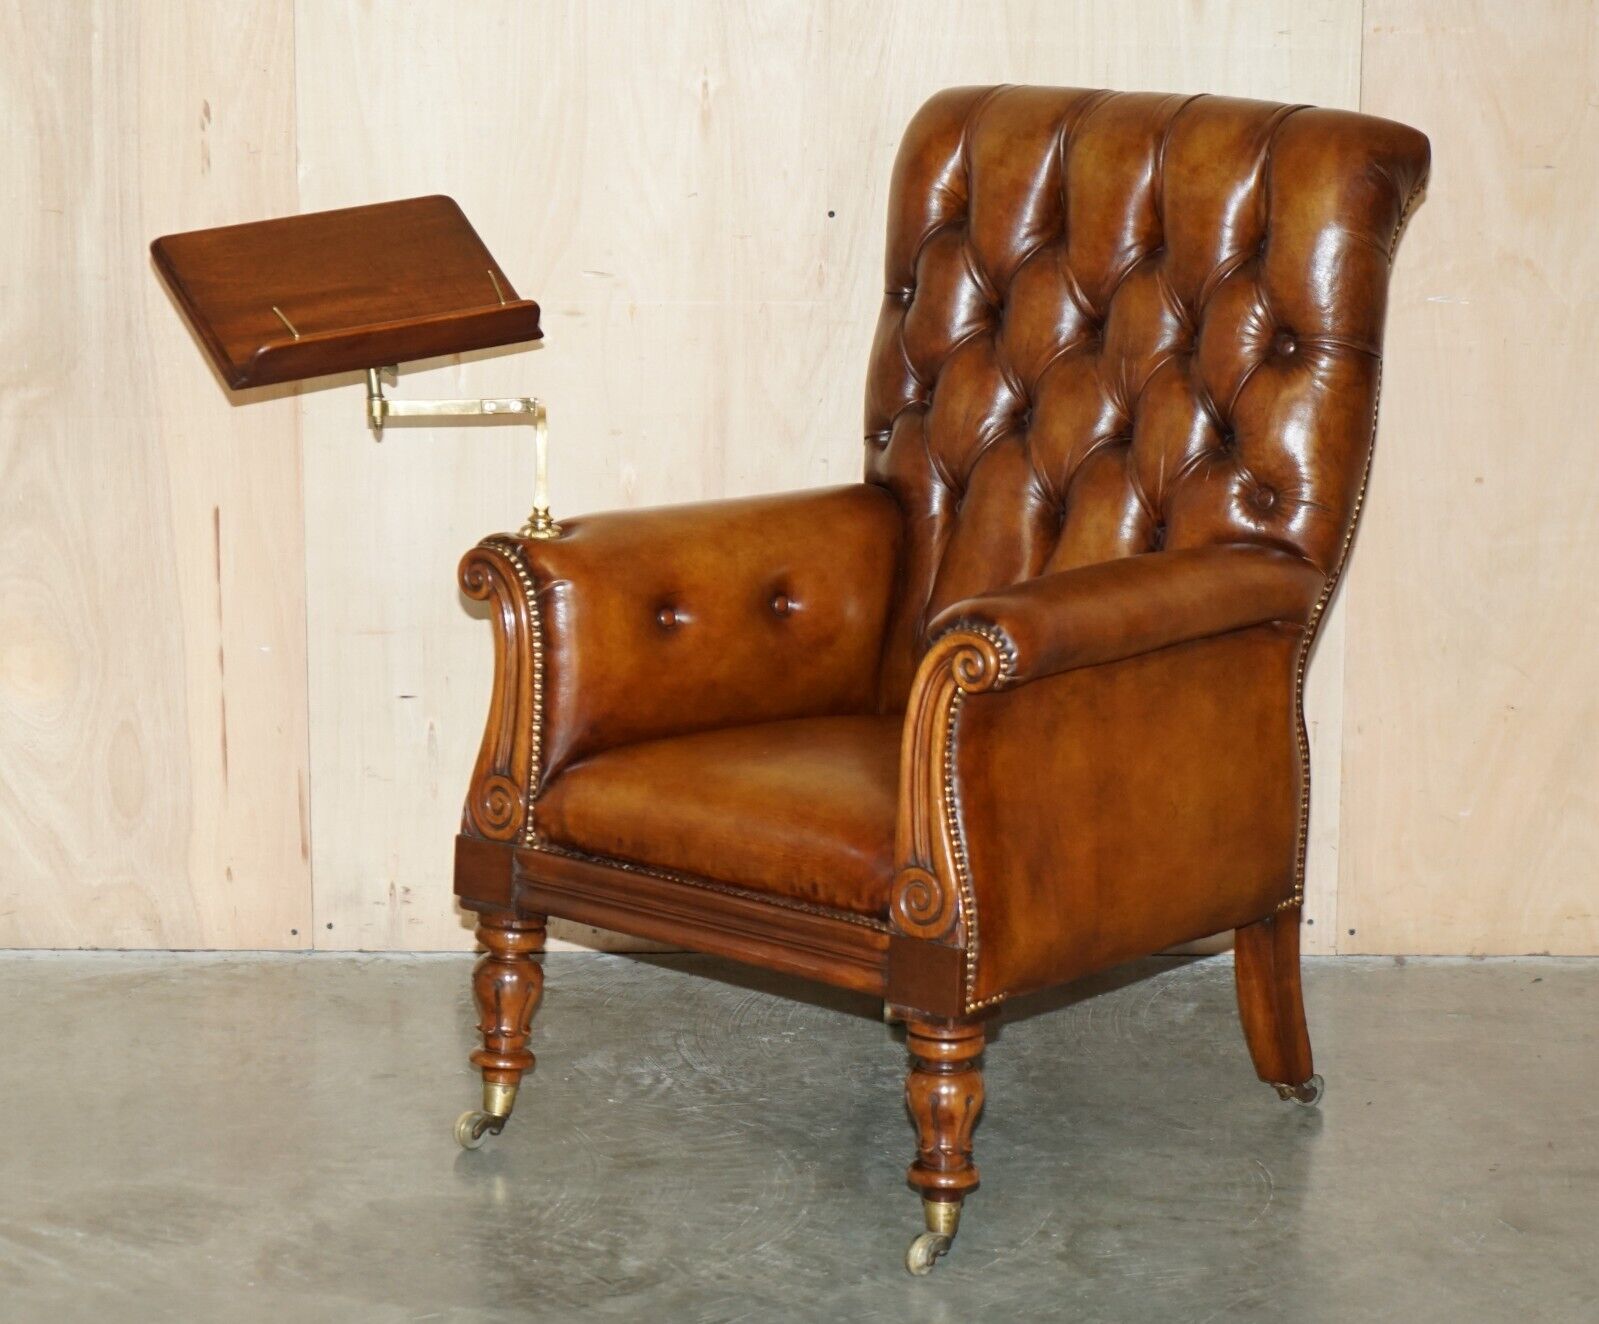 RESTORED ANTIQUE WILLIAM IV CHESTERFIELD BROWN LEATHER ARMCHAIR + WRITING SLOPE